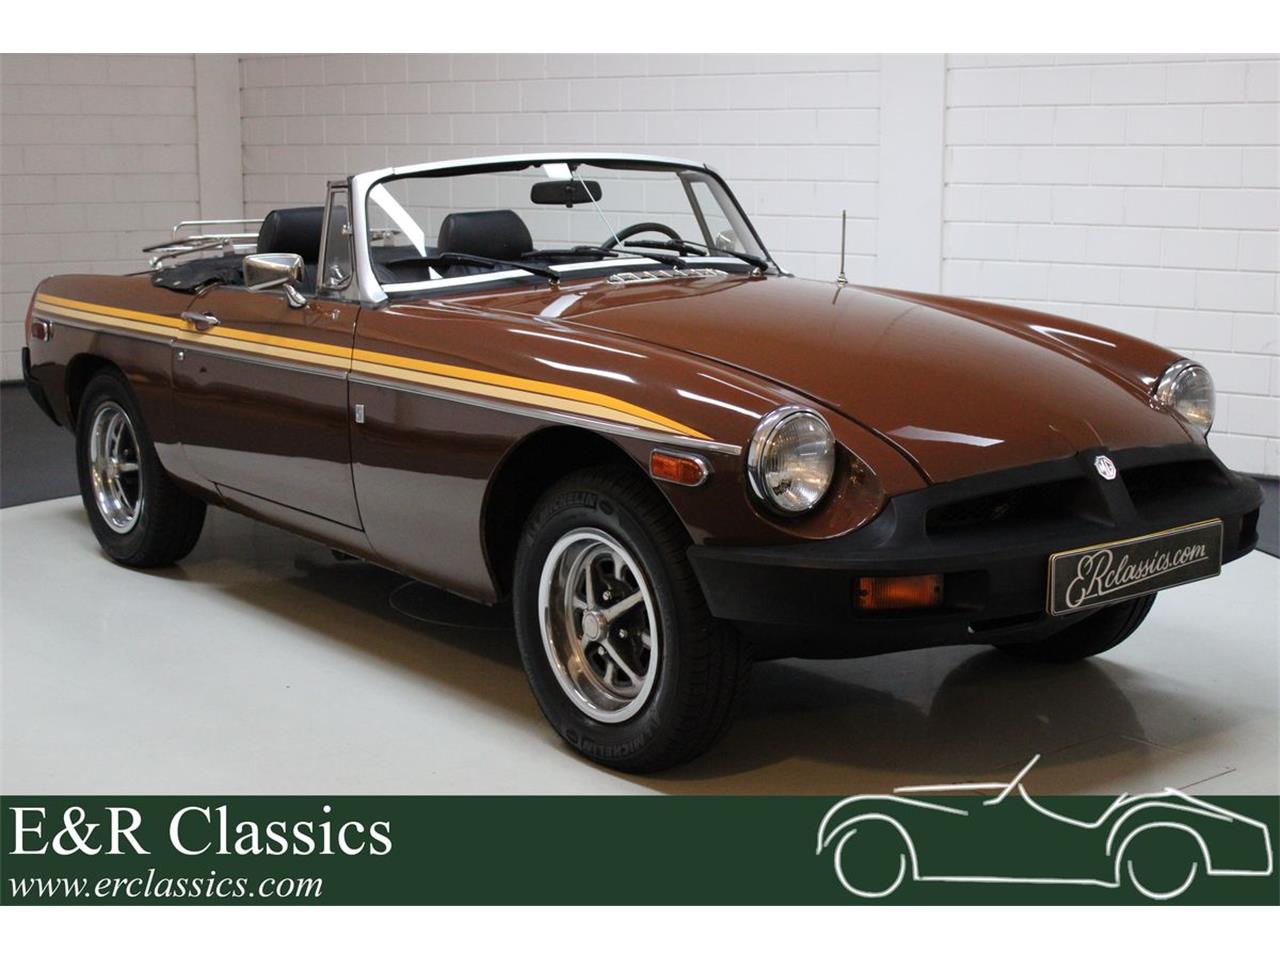 1978 MG MGB (CC-1440267) for sale in Waalwijk, [nl] Pays-Bas